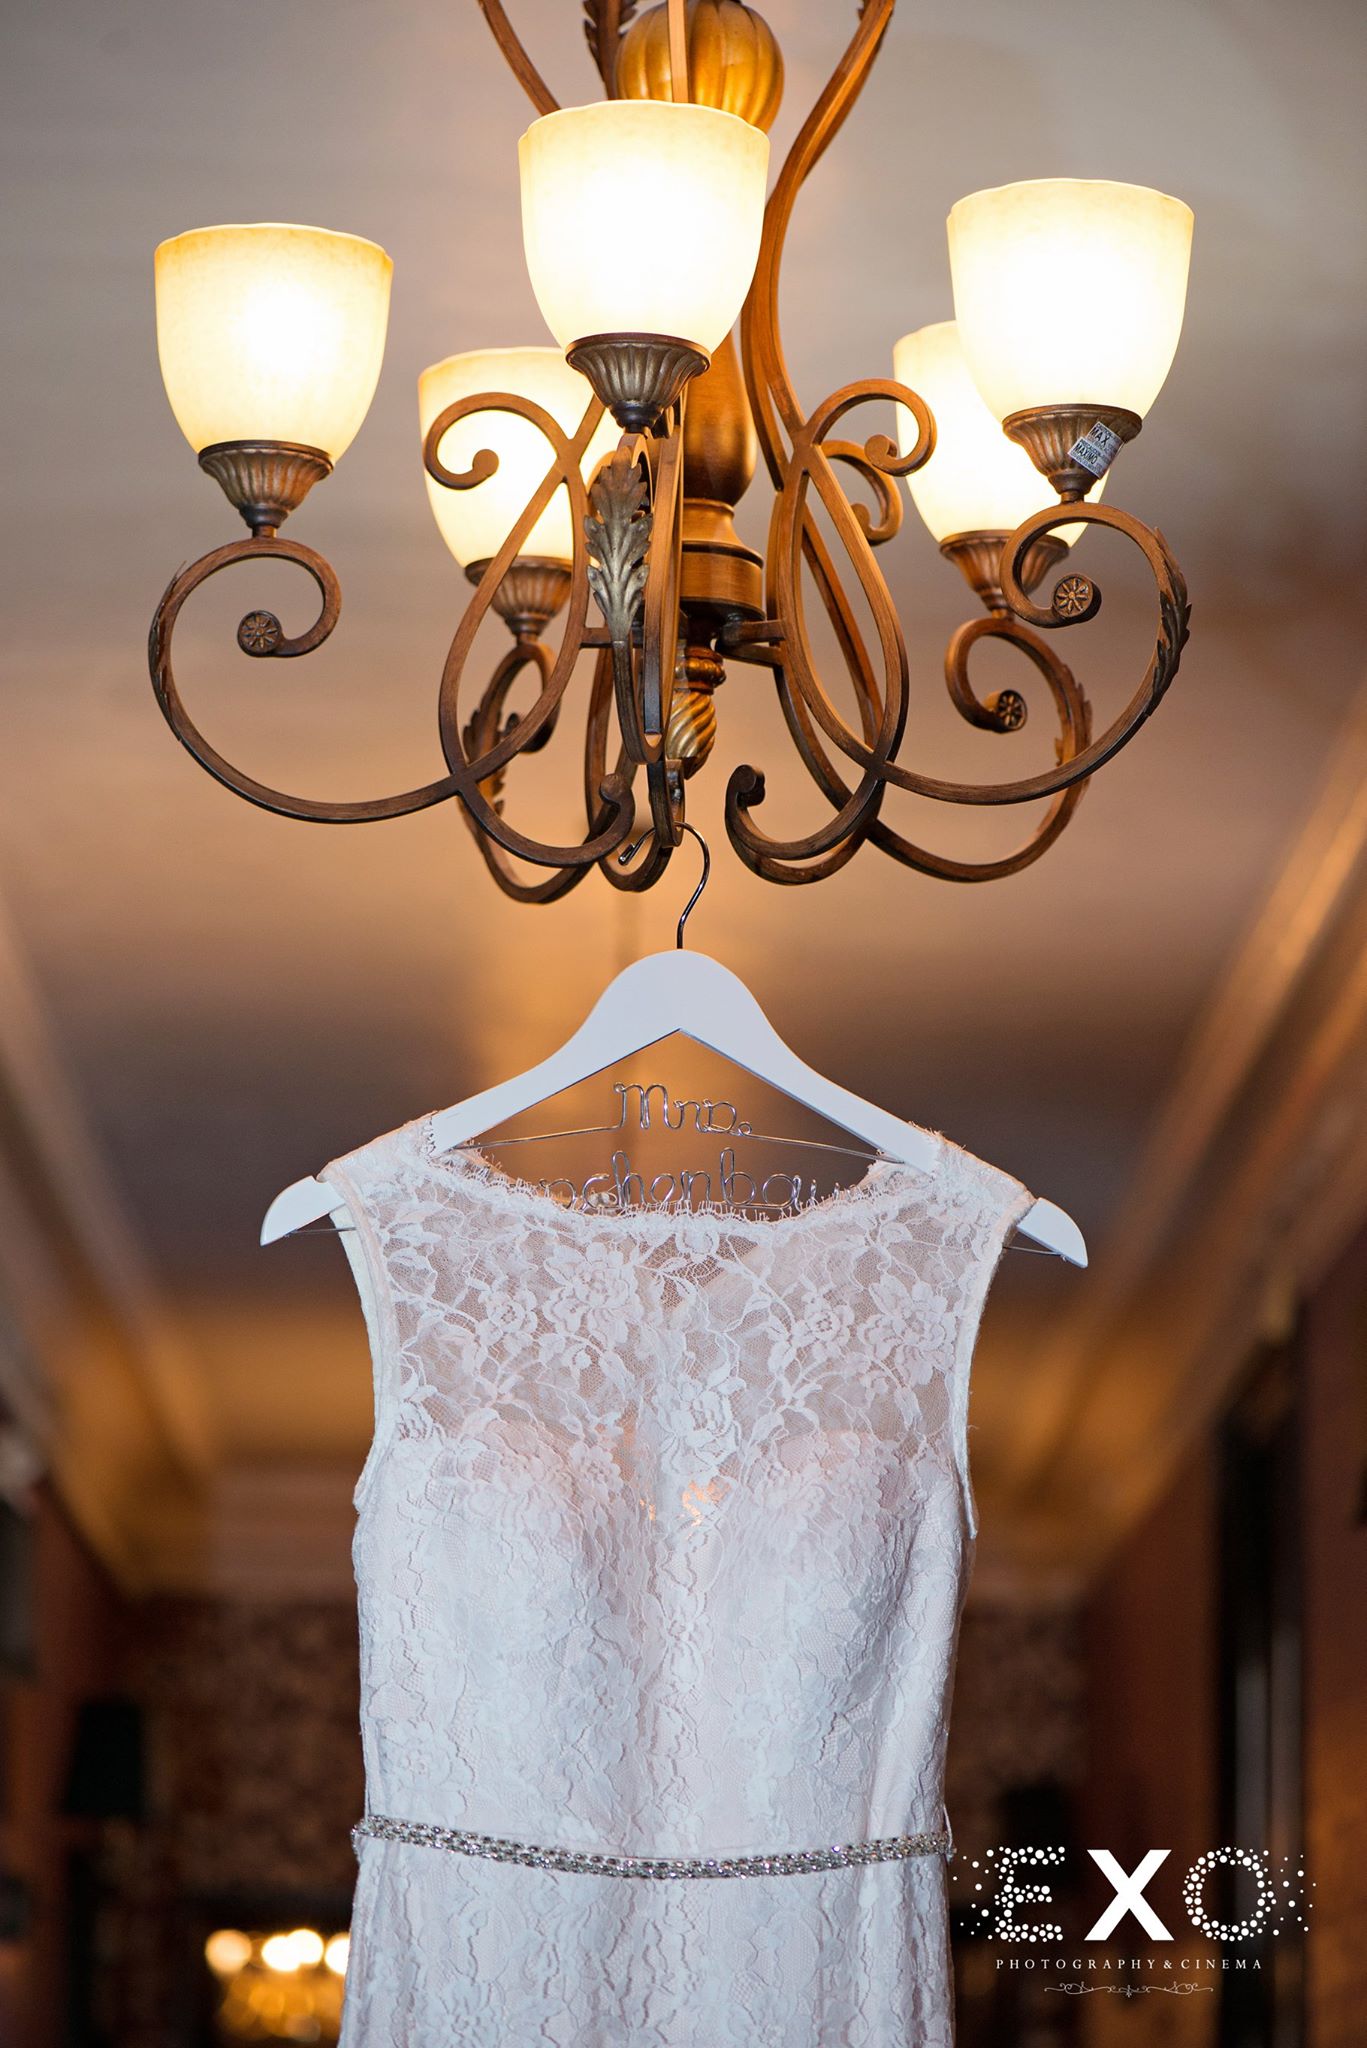 bridal gown and custom made hanger hanging from light fixture